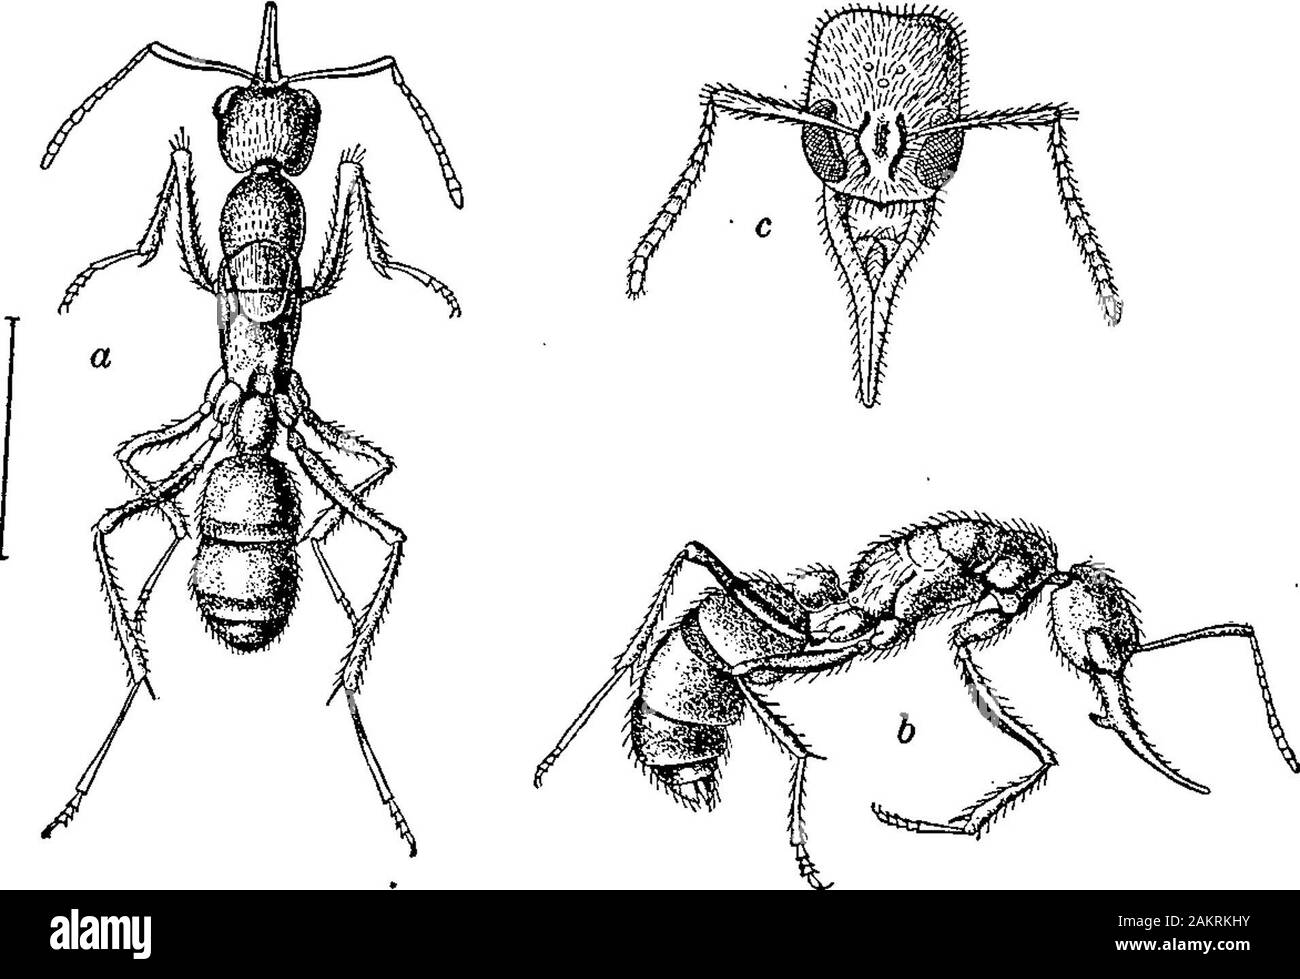 Observations on Gigantiops destructor Fabricius and other leaping ants. . astaneus amer-icanus Mayr; c, Myrmecia nigrocincta Smith; d, small Myrmecia sanguinedSmith; e, Harpegnathos saltator Jerdon. which the name Halmamyrmecia subgen. nov. (with pilosulaF. Smith as subgenotype) may be proposed. In Gigantiops I find an even more pronounced elongation andbasal incrassation of the hind femur than in Pristomyrmecia orHalmamyrmecia. As there is only one species of Gigantiops, Ihave compared its hind femur (Fig. 20) with that of a non-leapingCamponotus worker of the same size (b). It will be seen t Stock Photo